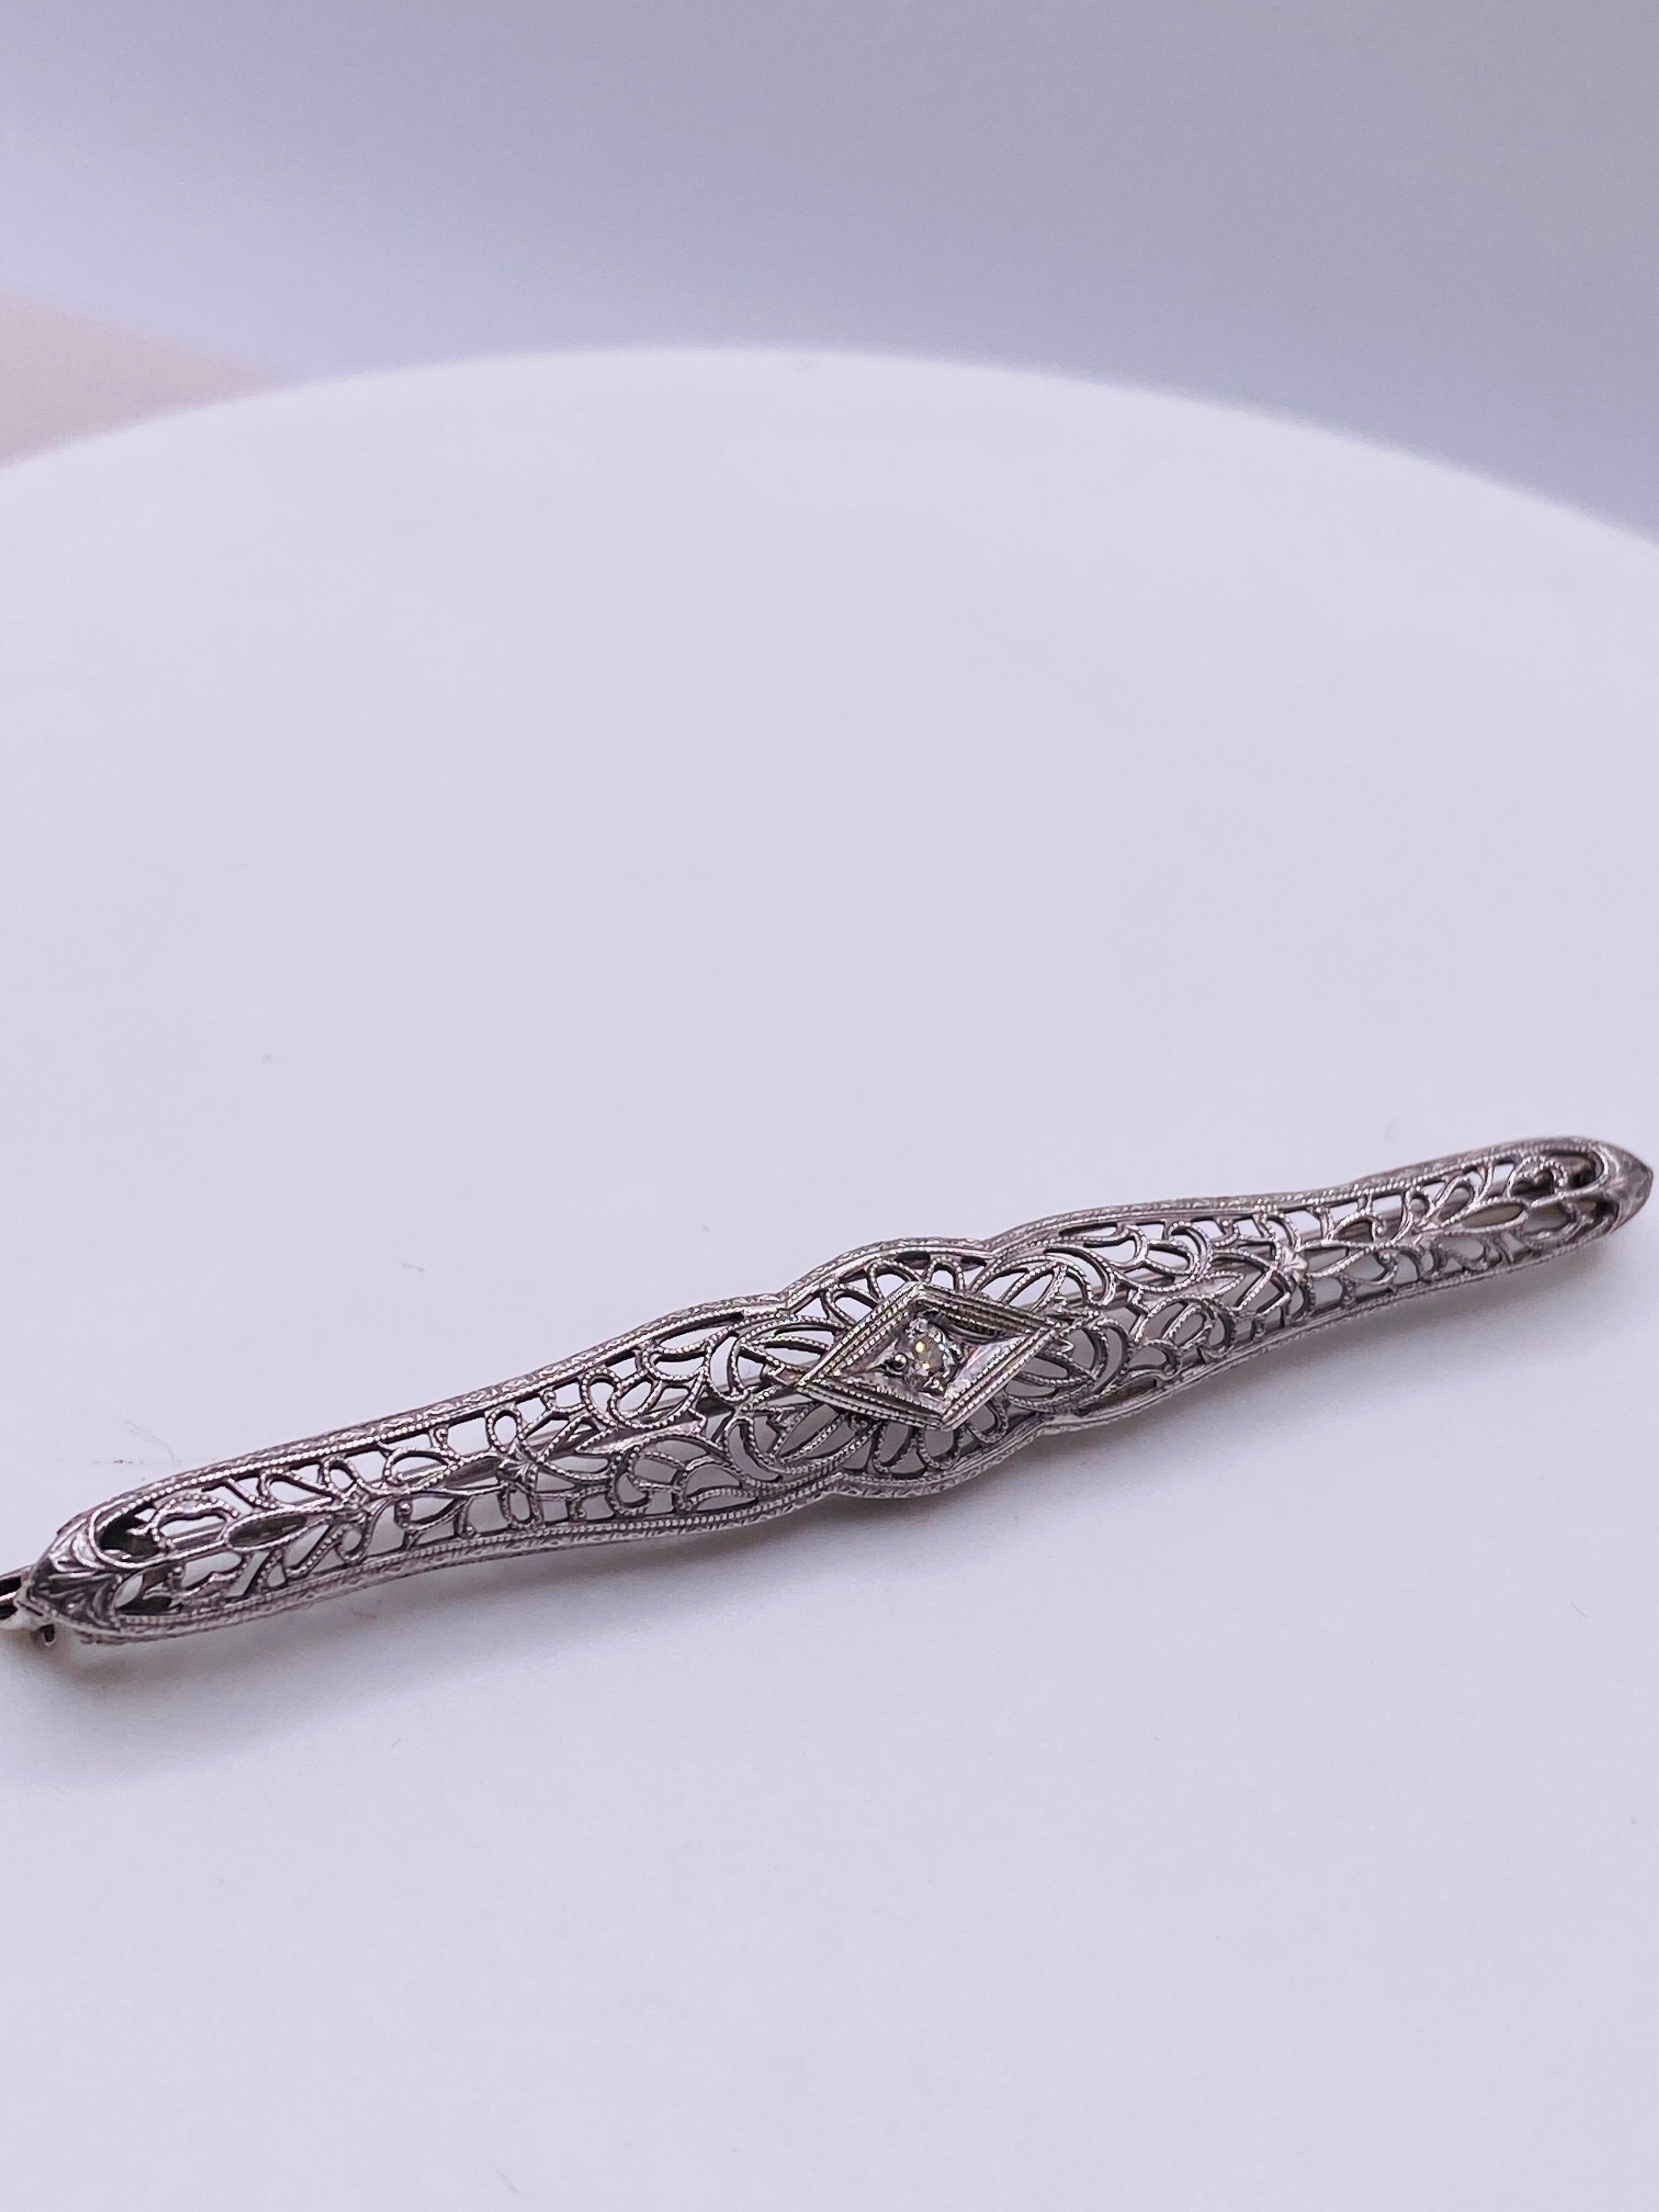 18k white gold antique reproduction filigree brooch pin with 2.50 x 2.40 mm, .06 carat old mine cut J/K Si2 diamond. 3.0Dwt. 65mm long.